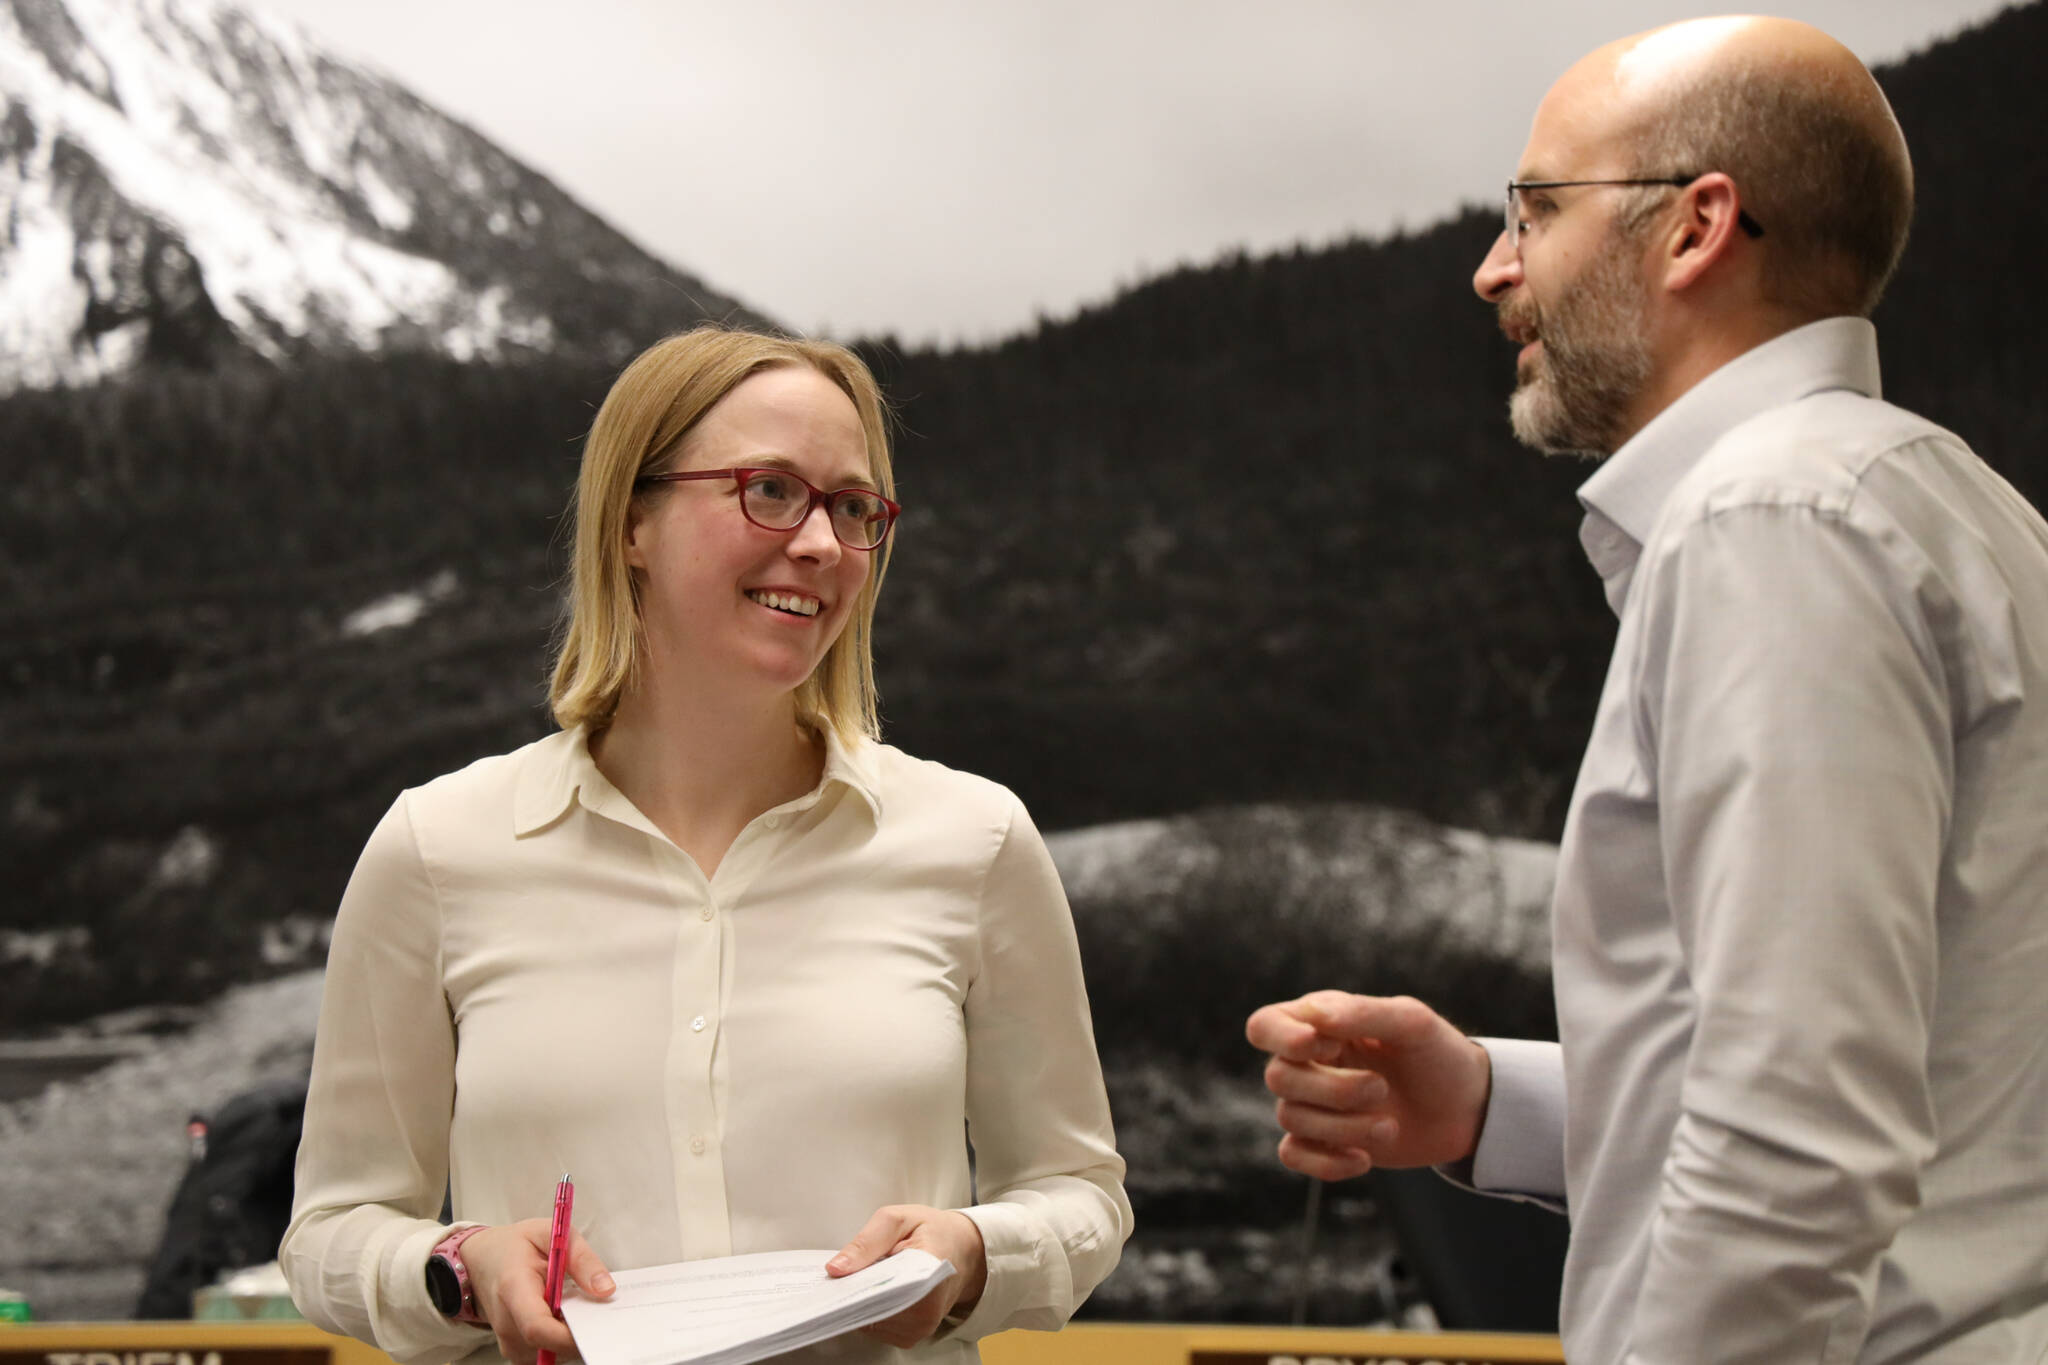 Assembly member Carole Triem chats with Deputy City Manager Robert Barr during a Finance Committee meeting in early May. Triem announced Wednesday she is departing from her role on the Assembly on July 10, citing family medical issues. (Clarise Larson / Juneau Empire File)